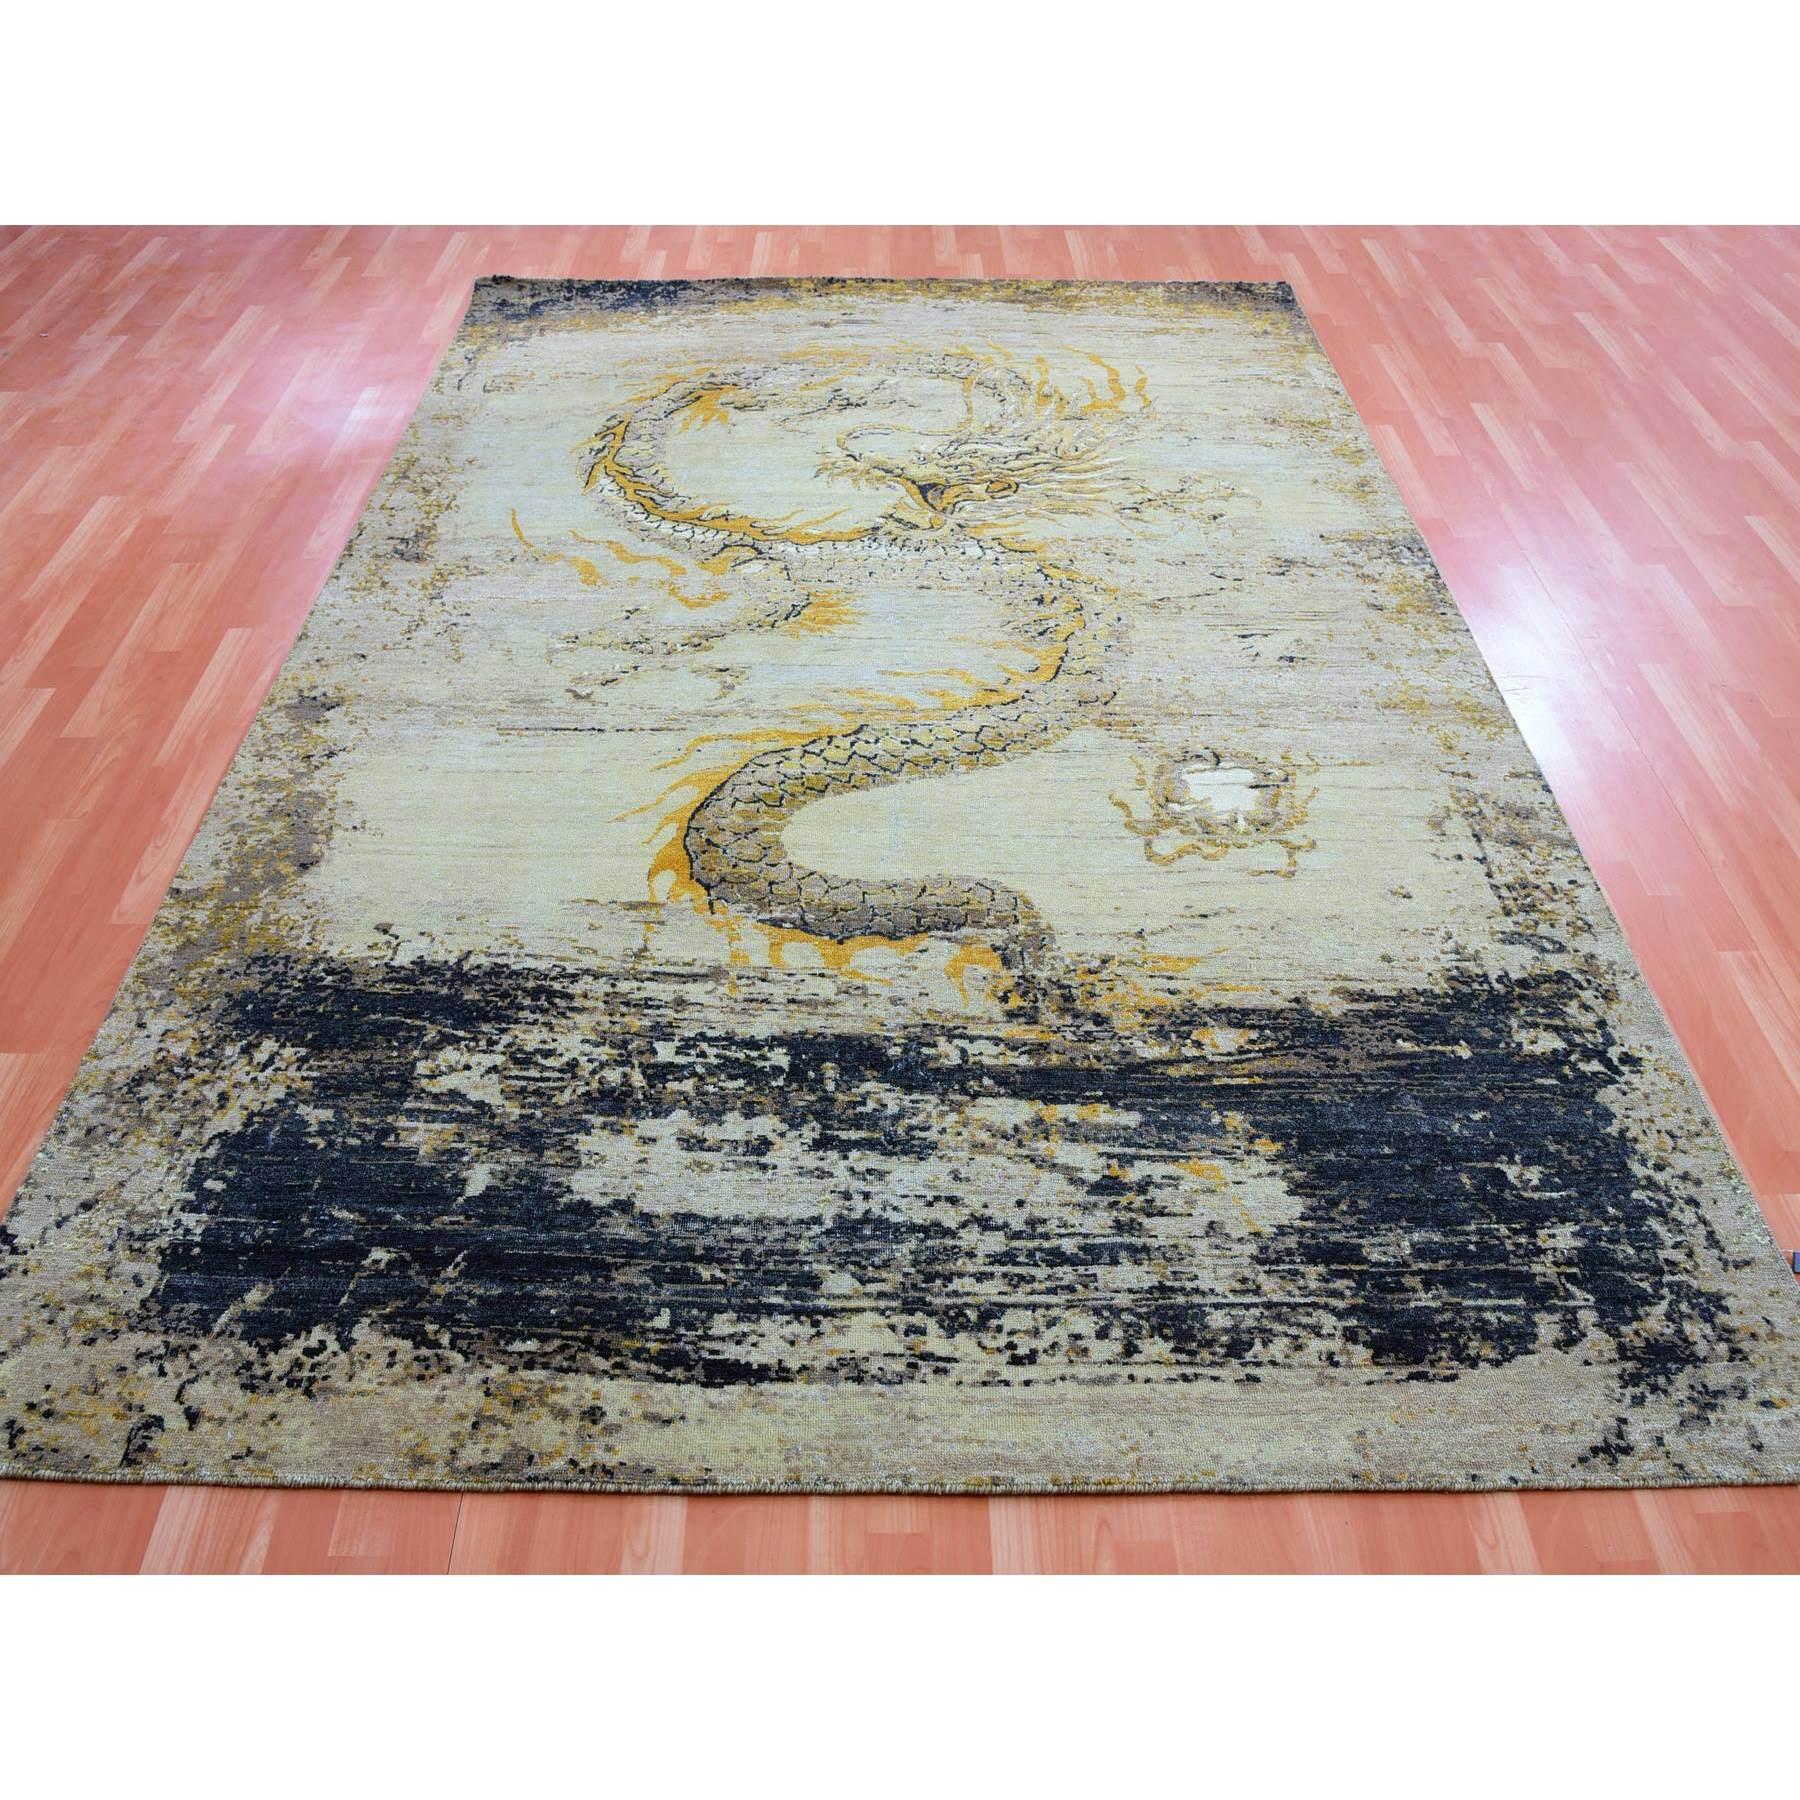 Medieval Beige Pure Wool Antique Chinese Inspired Dragon Design Hand Knotted Rug 8'x10'4